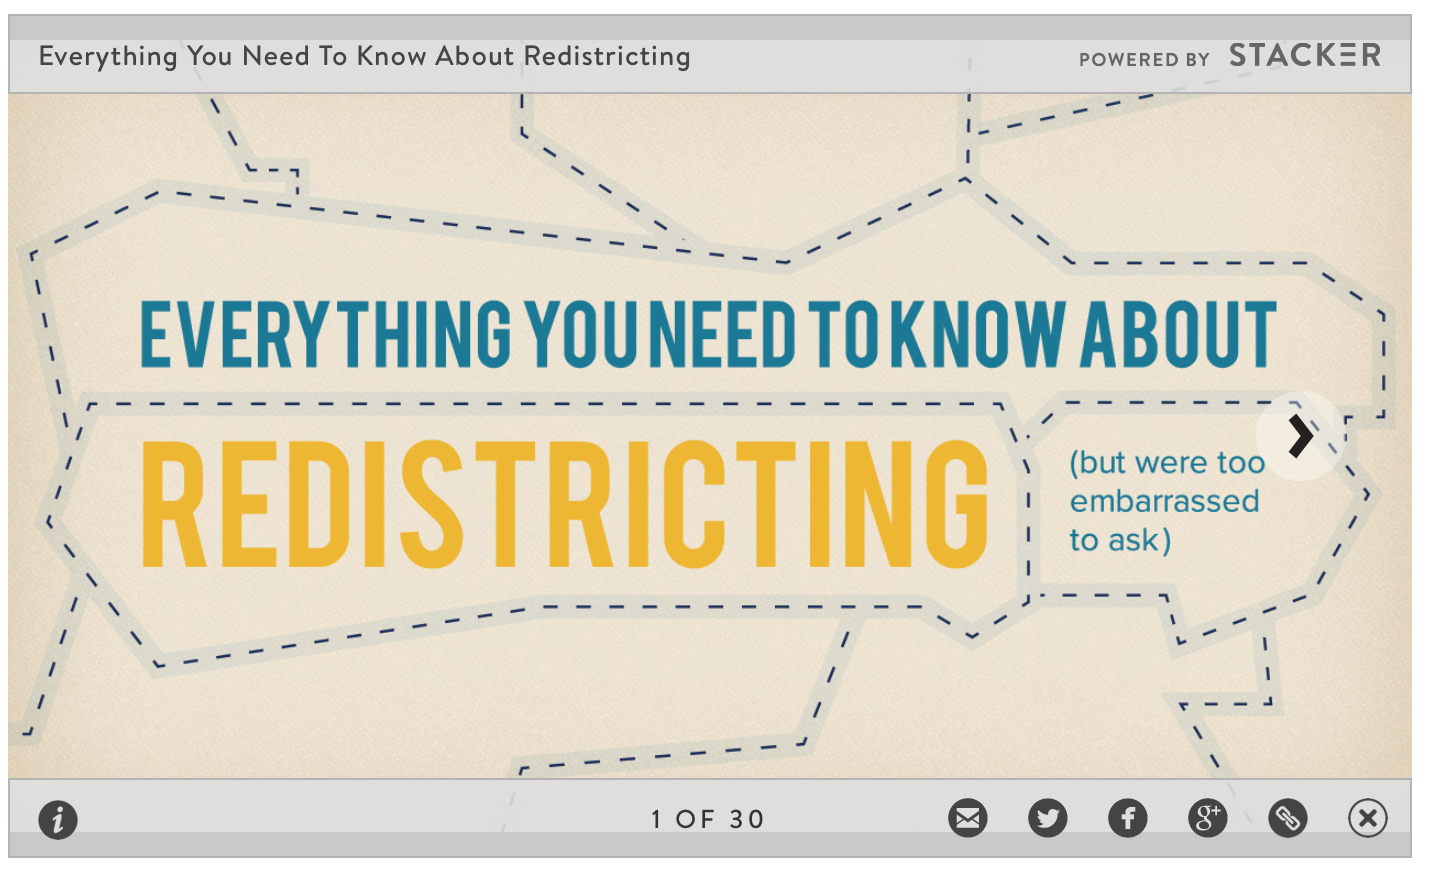 Click on image to go to a handy explanation of redistricting, and how it can go awry.